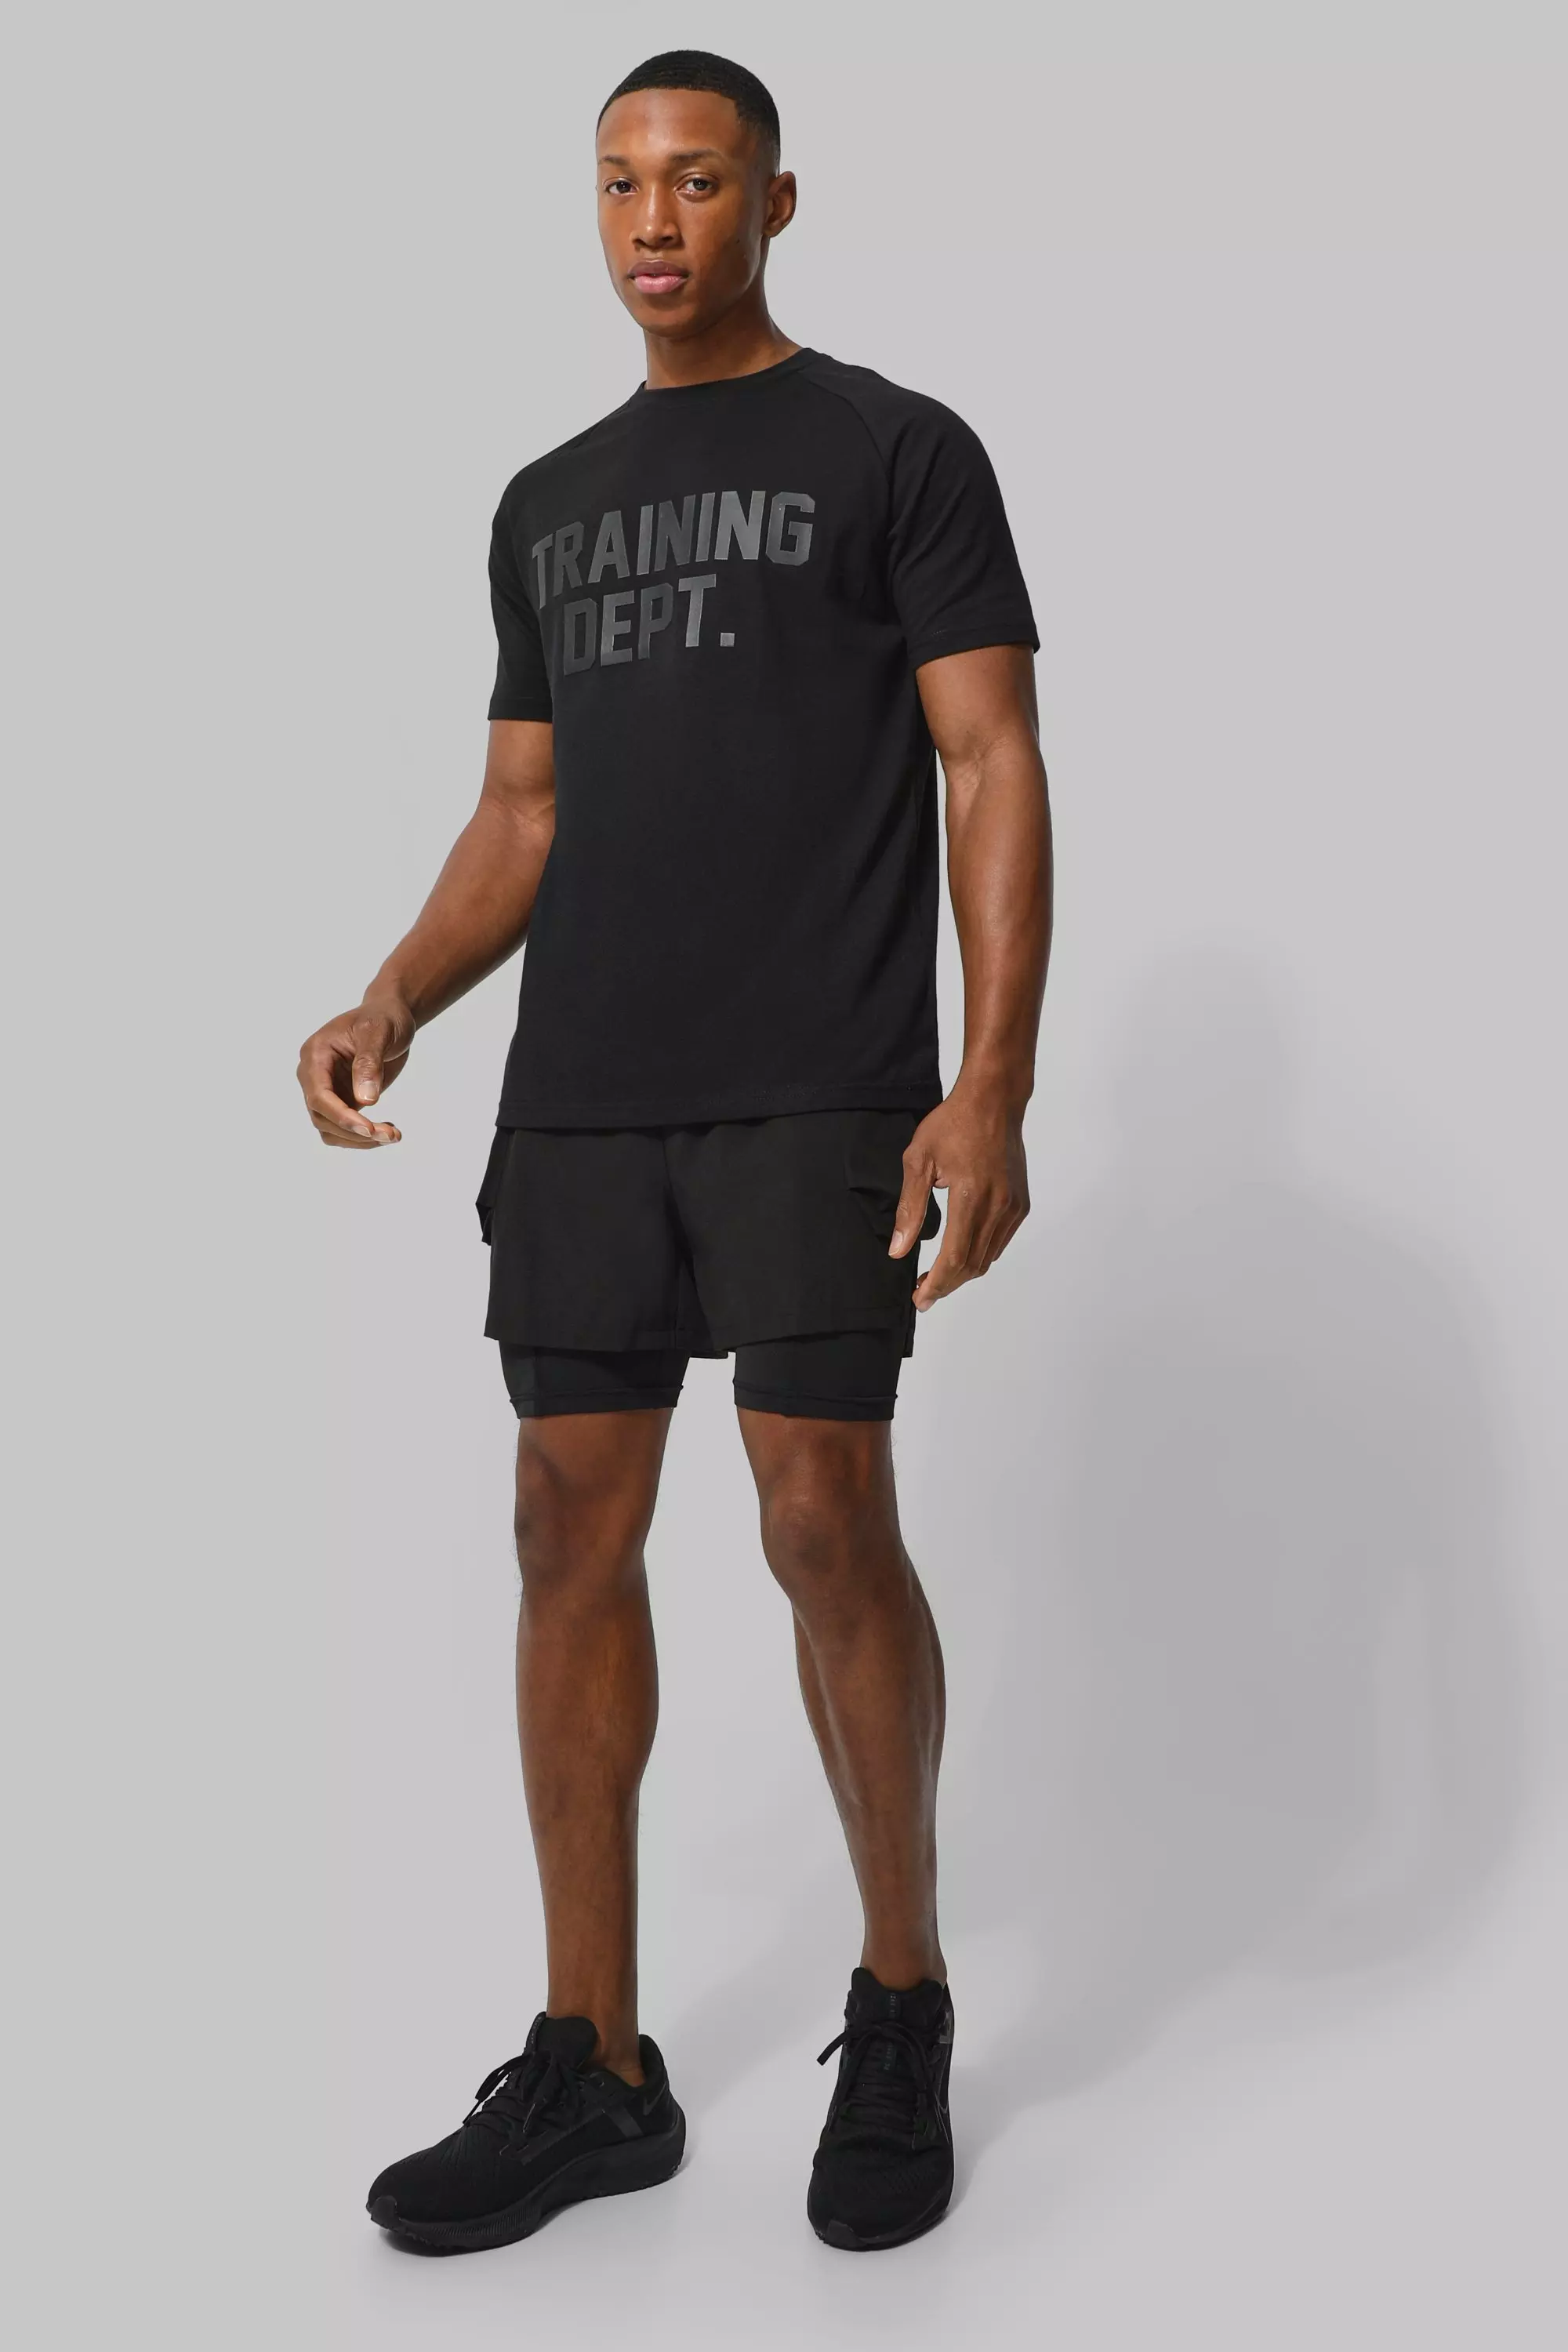 Active Muscle Fit Training Dept T Shirt